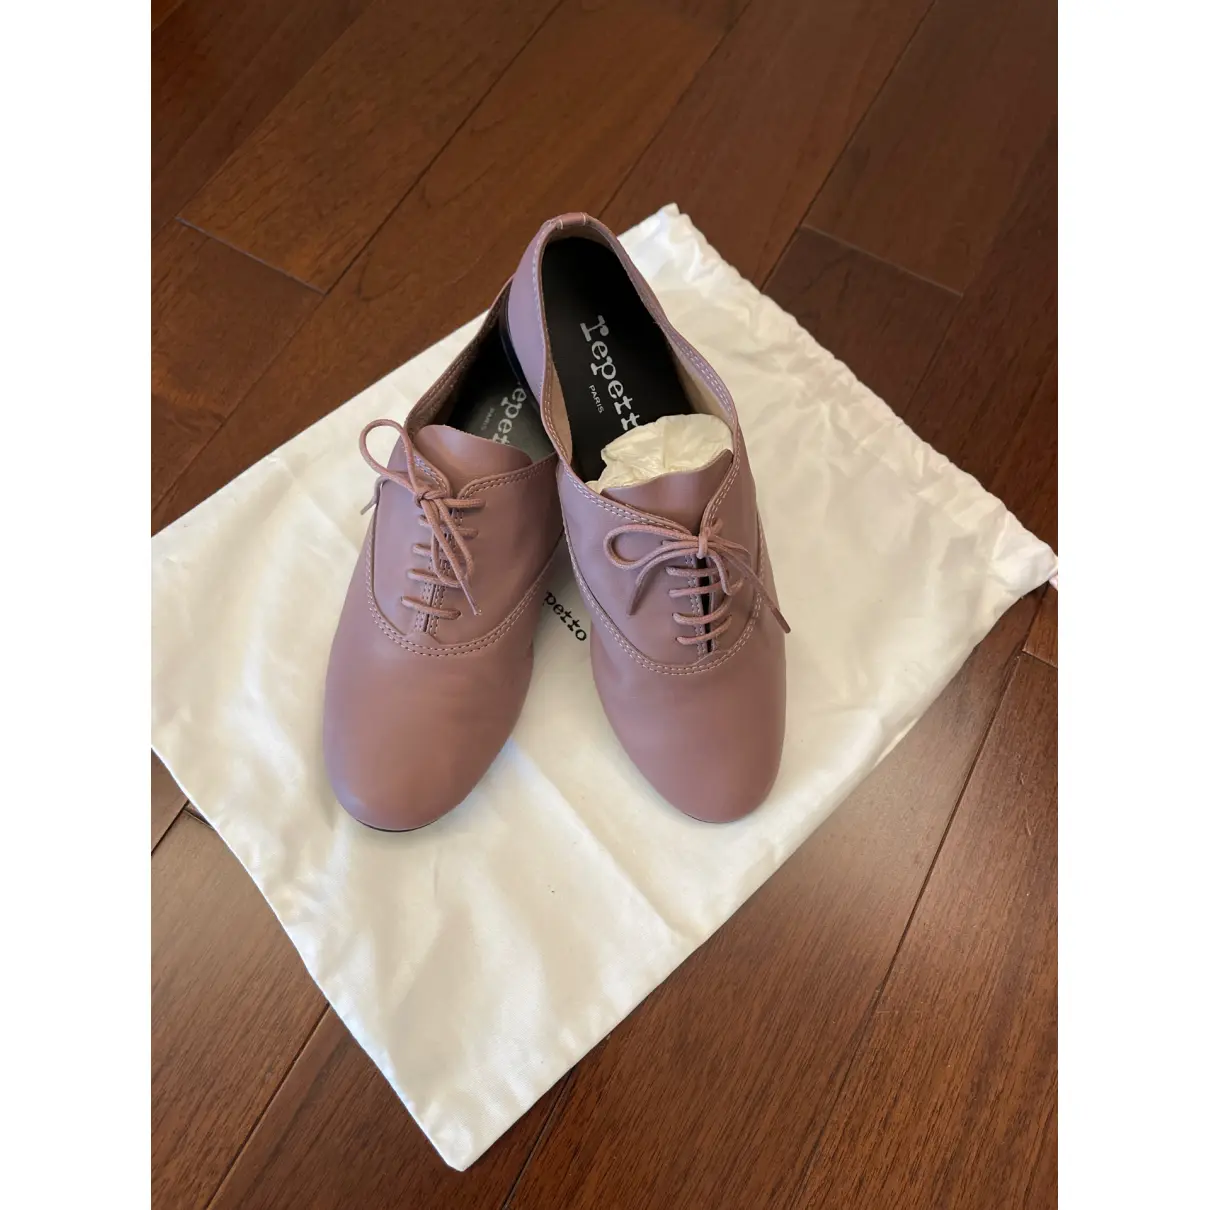 Buy Repetto Leather lace ups online